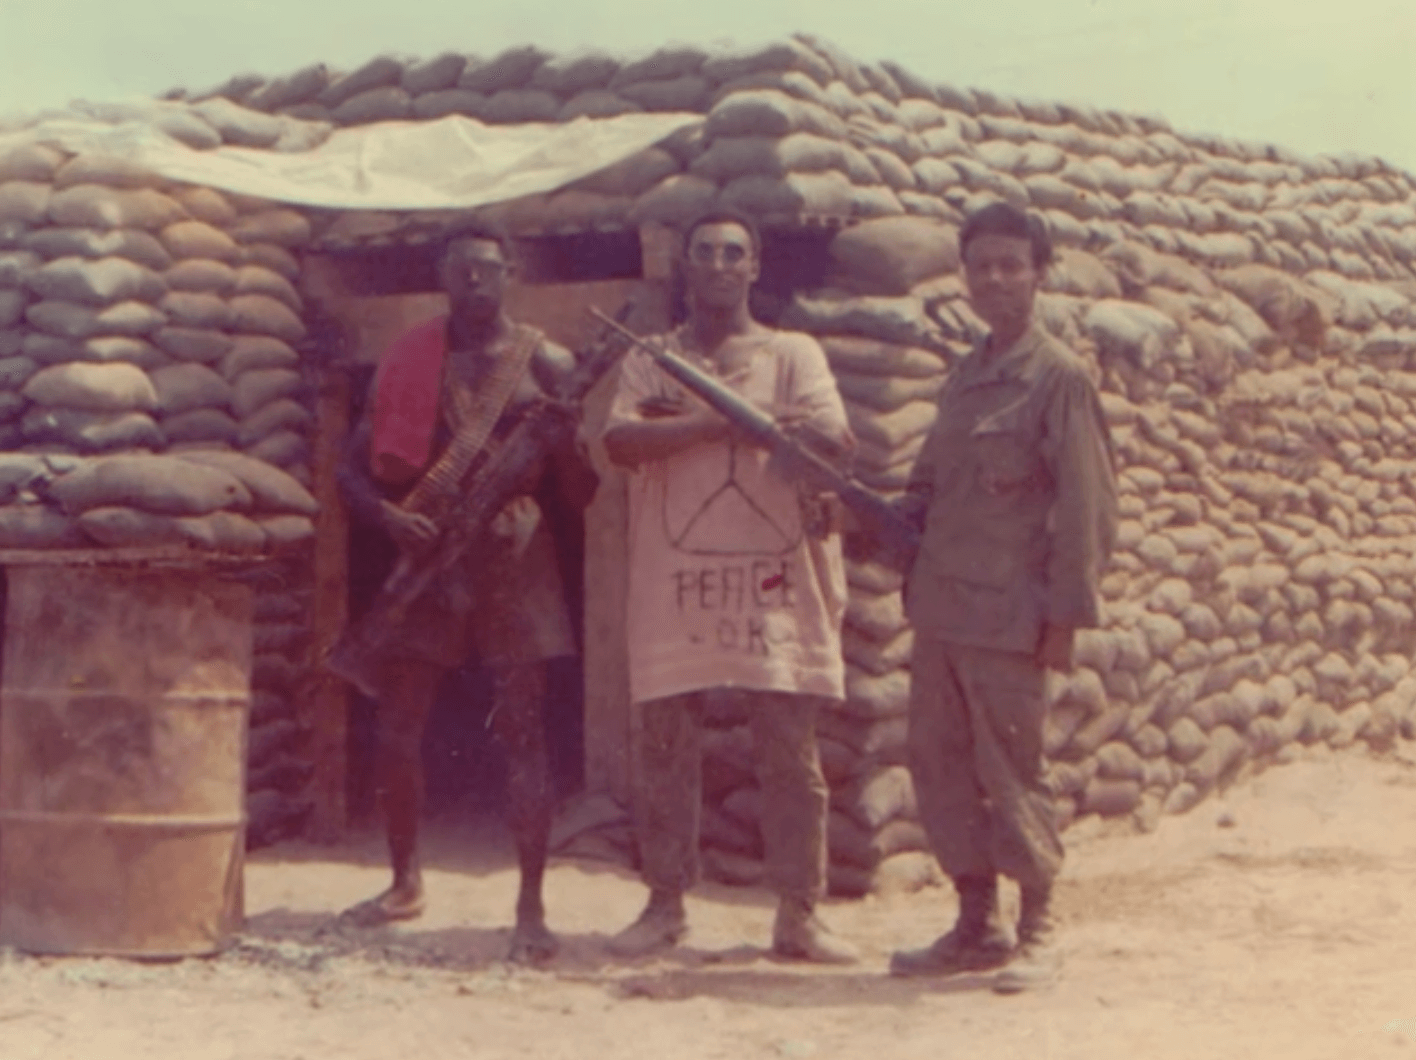 Three black soldiers standing outside a sandbag bunker. The leftmost is in shorts, holding a gun and with bandoliers strapped across his body; the middle wears an oversized t-shirt with a peace sign that says "Peace OK"; the rightmost is in full gear, also holding a gun.